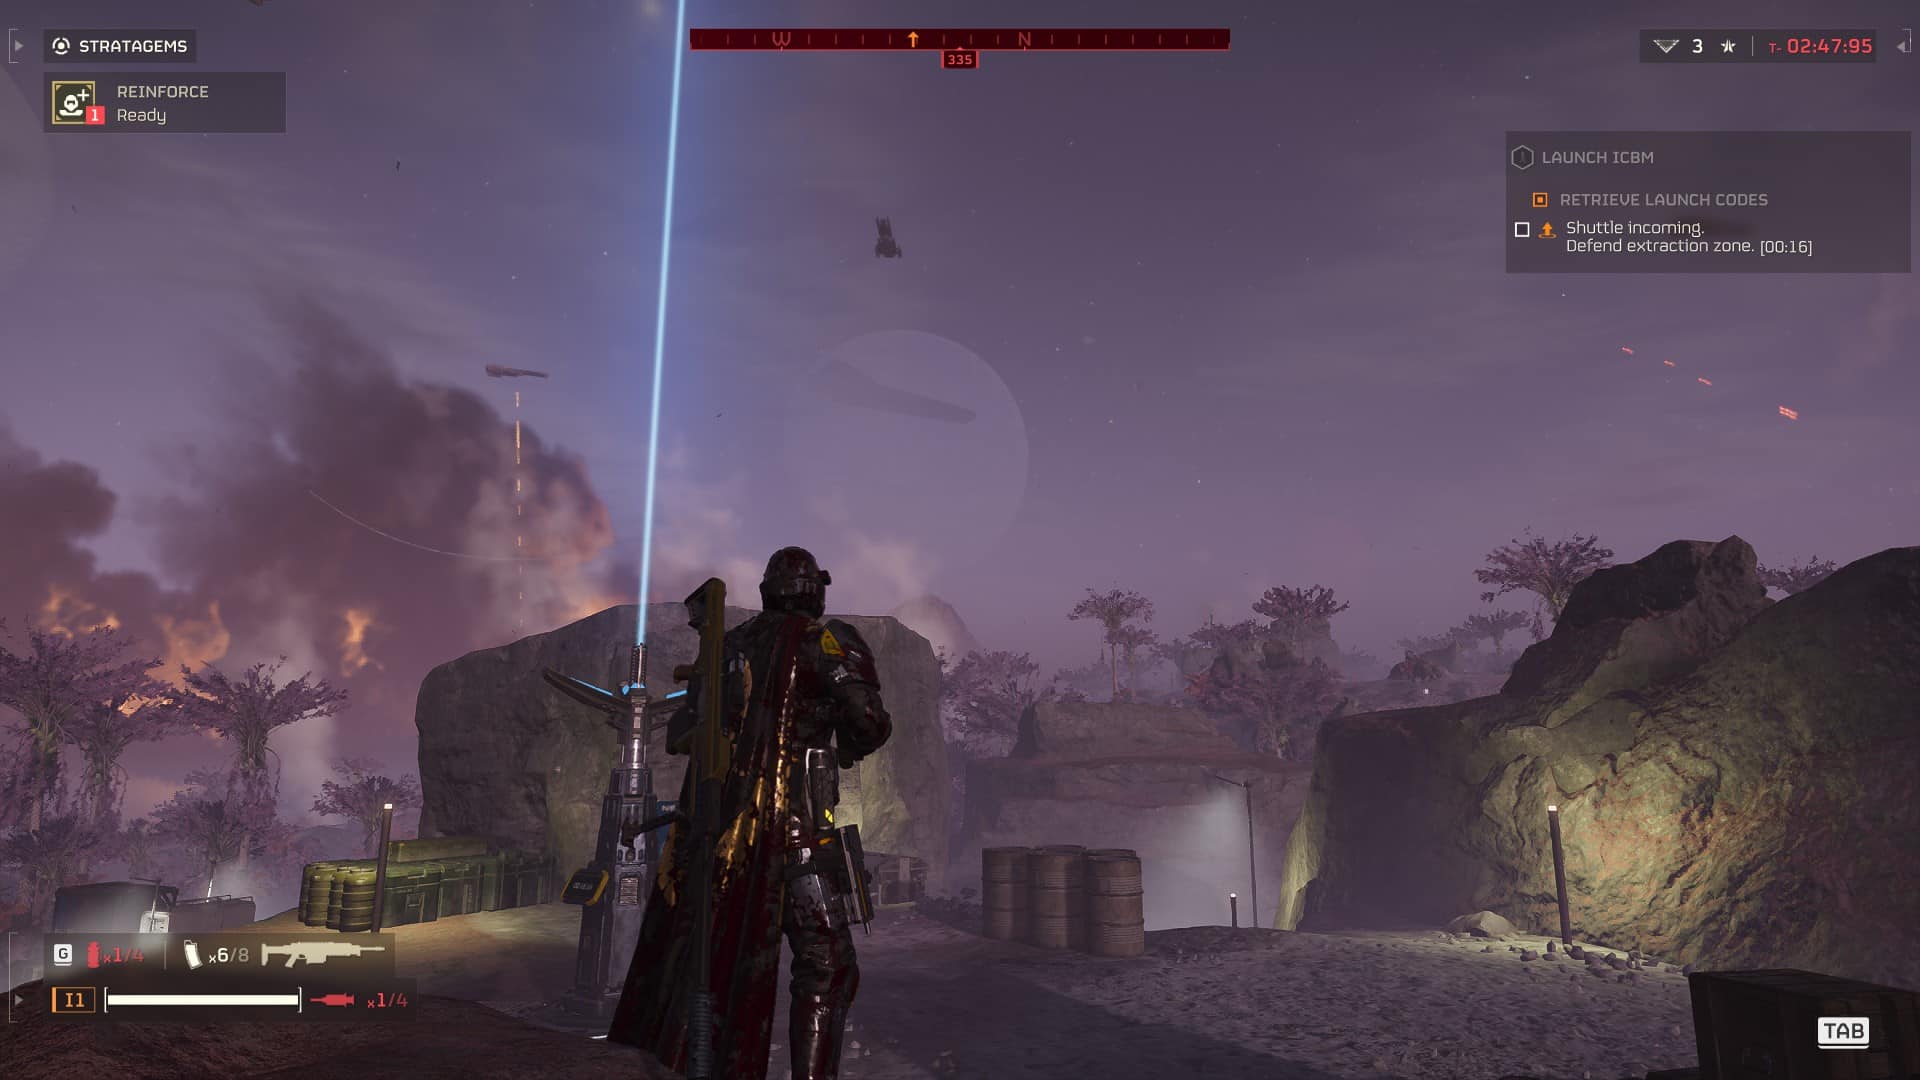 A player character in futuristic armor stands in a desolate landscape with a reddish sky while a Helldivers 2 space shuttle launch is visible in the distance in a video game.